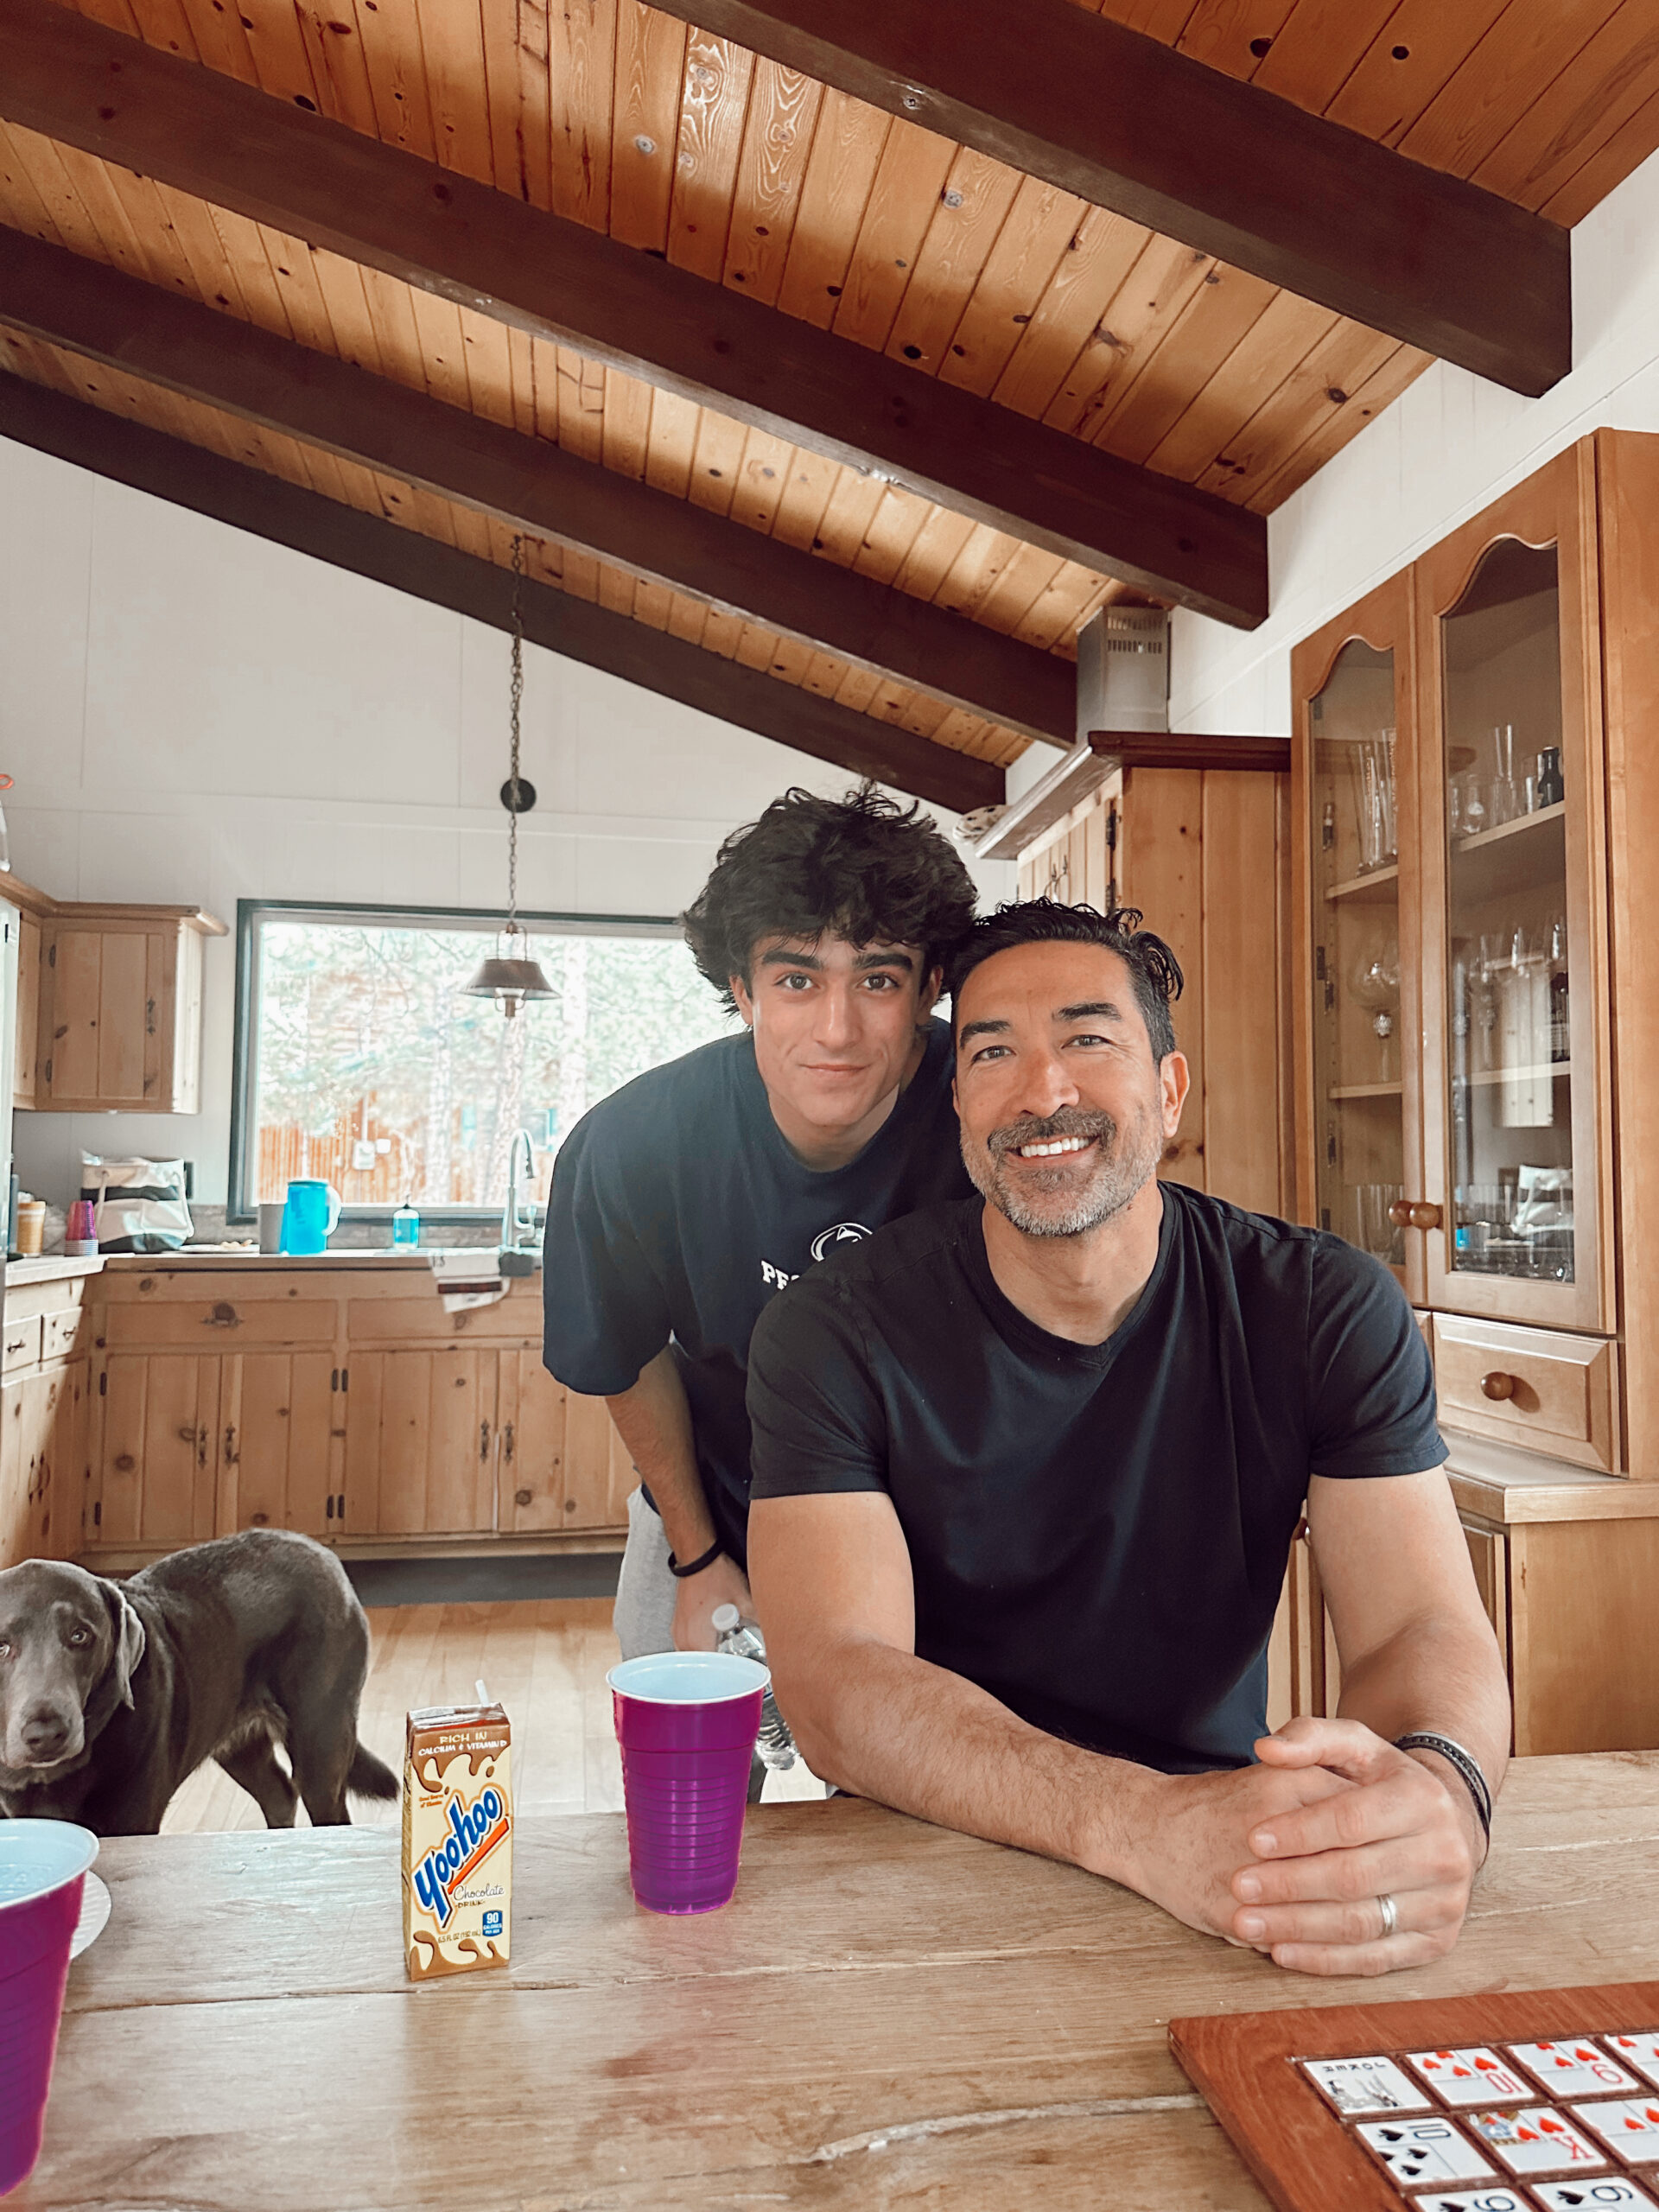 son and dad at kitchen table